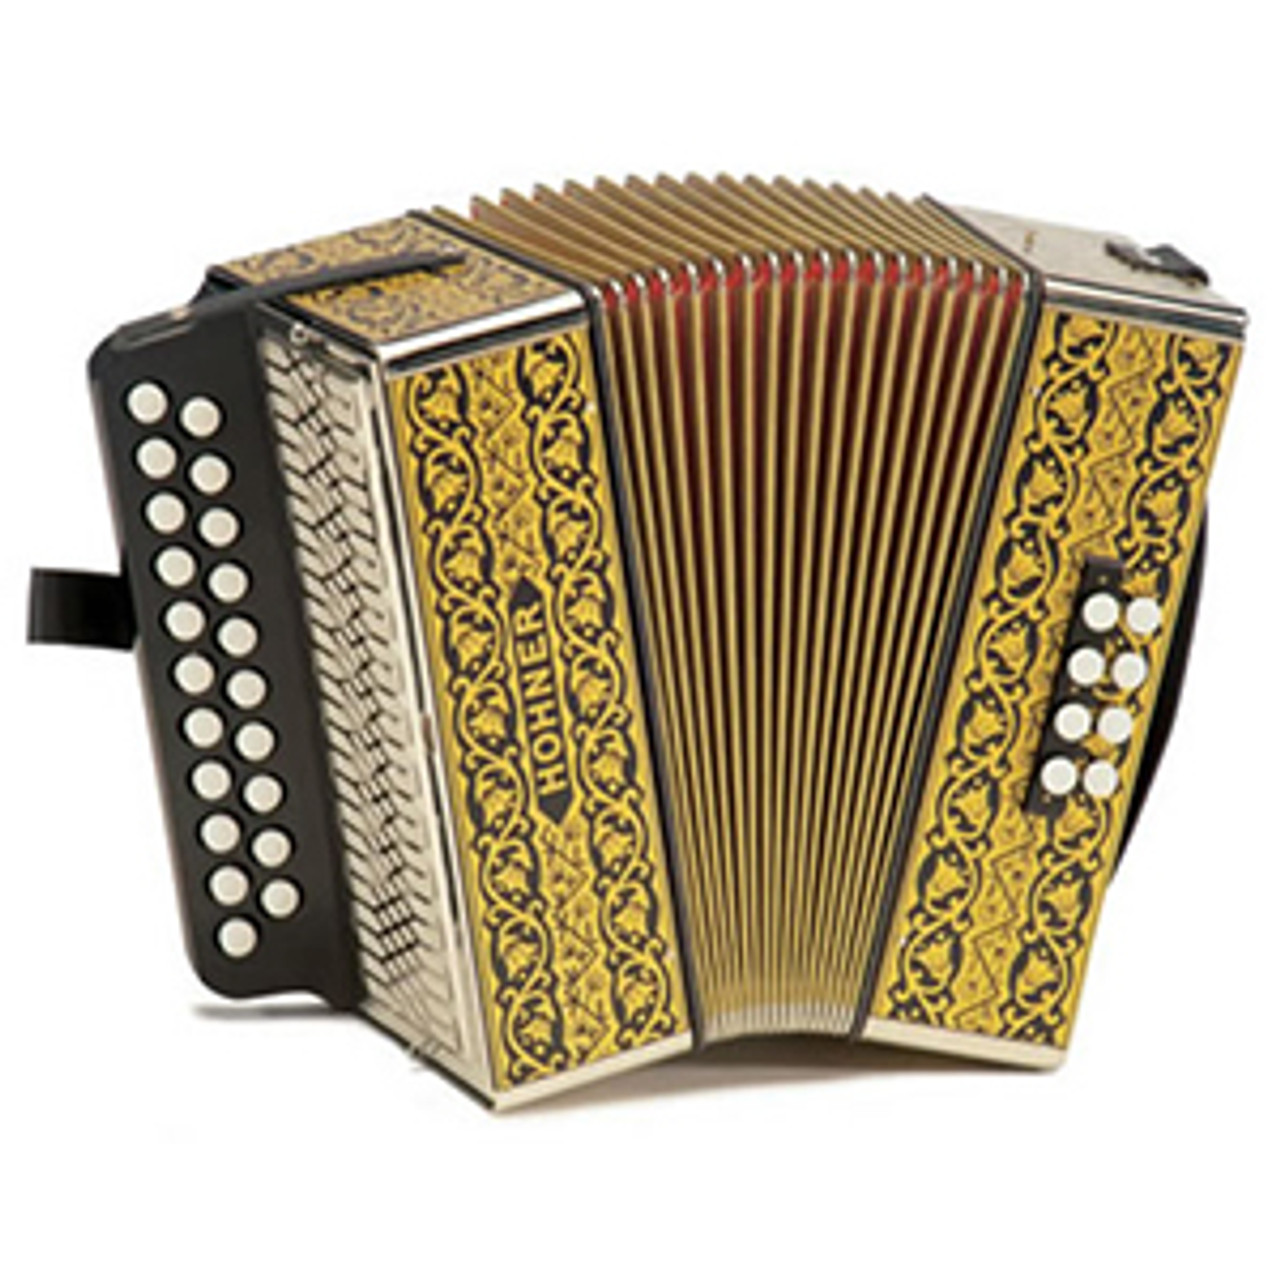 Hohner 2915 G/C Vienna 2-Row Diatonic Button Accordion, 21 Treble/8 Bass Buttons, Mm Reeds, Black & Gold, With Straps (15-A3405s)